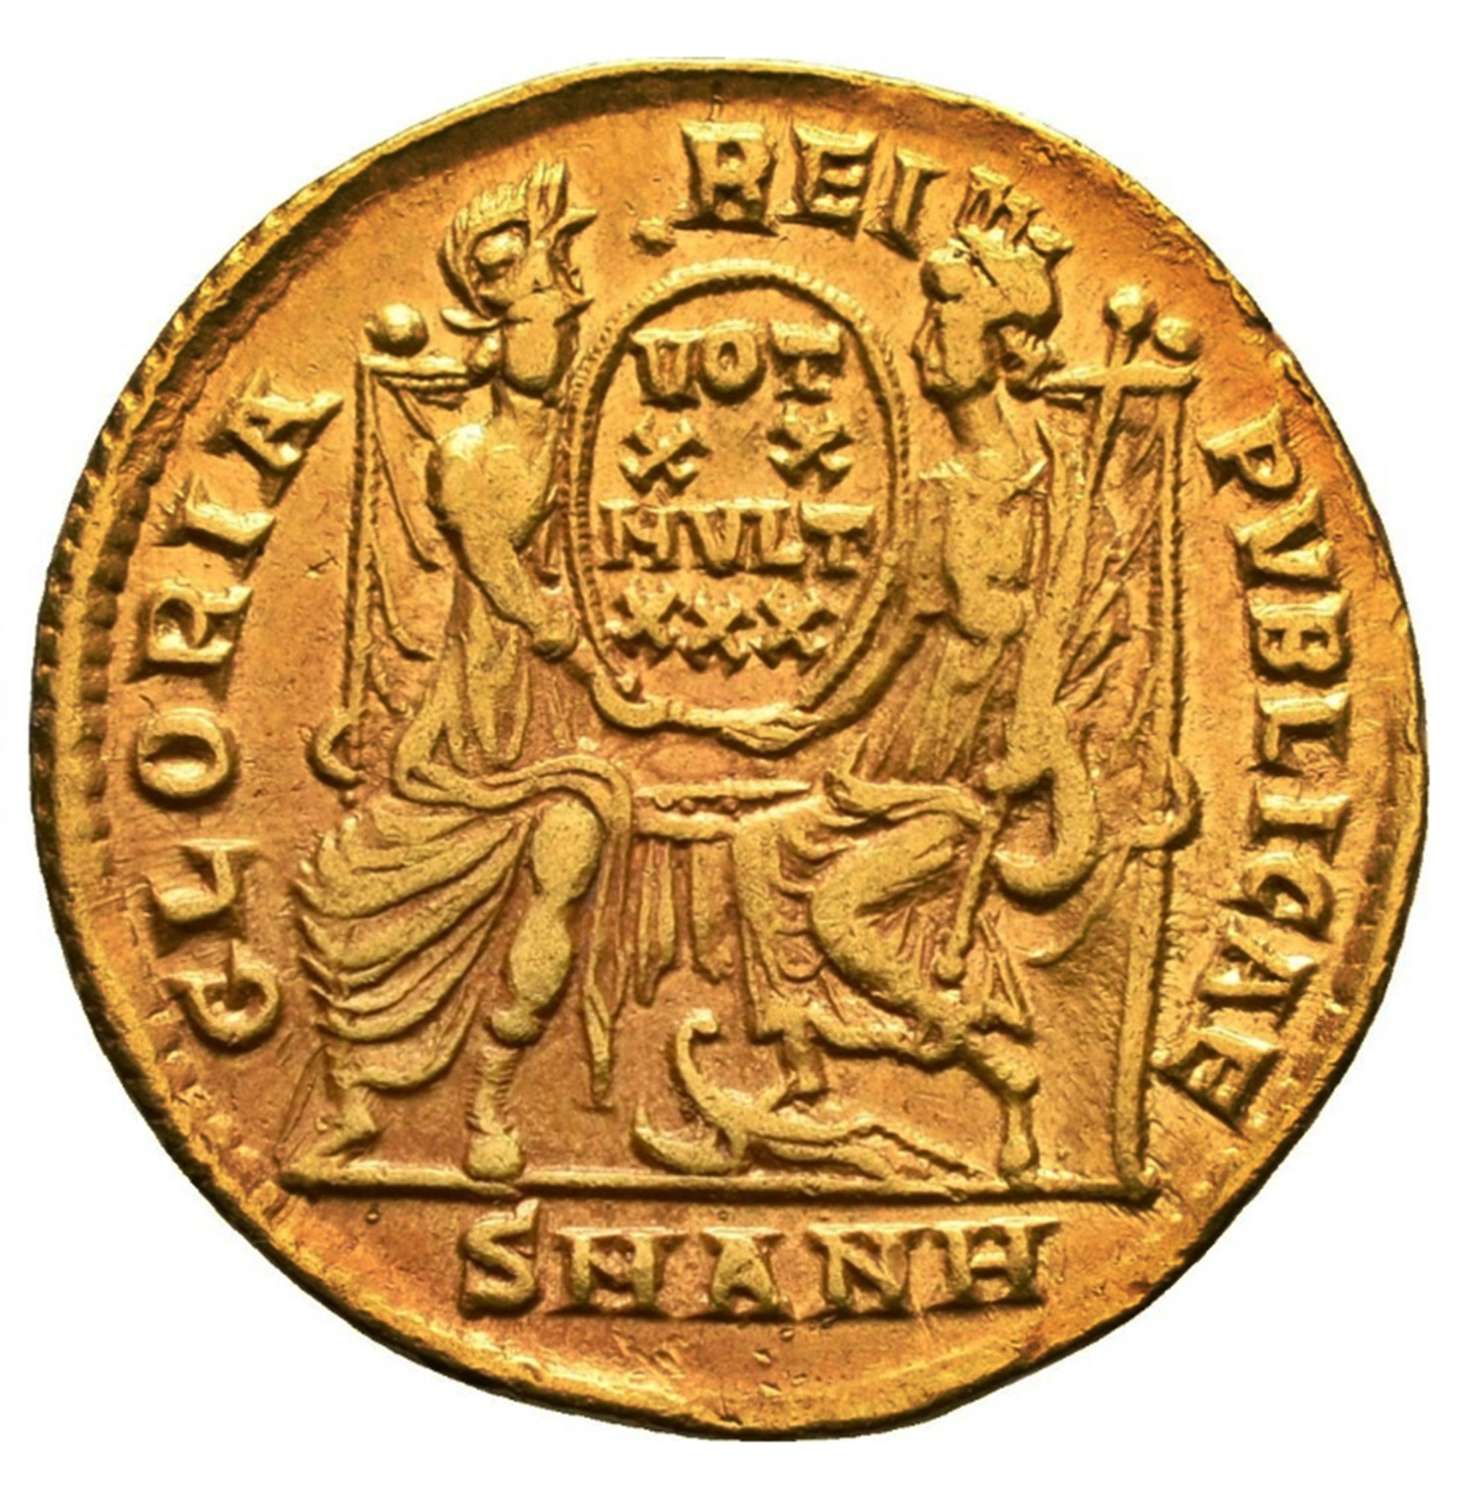 Roman Gold Solidus of Emperor Constantius II from the Antioch mint